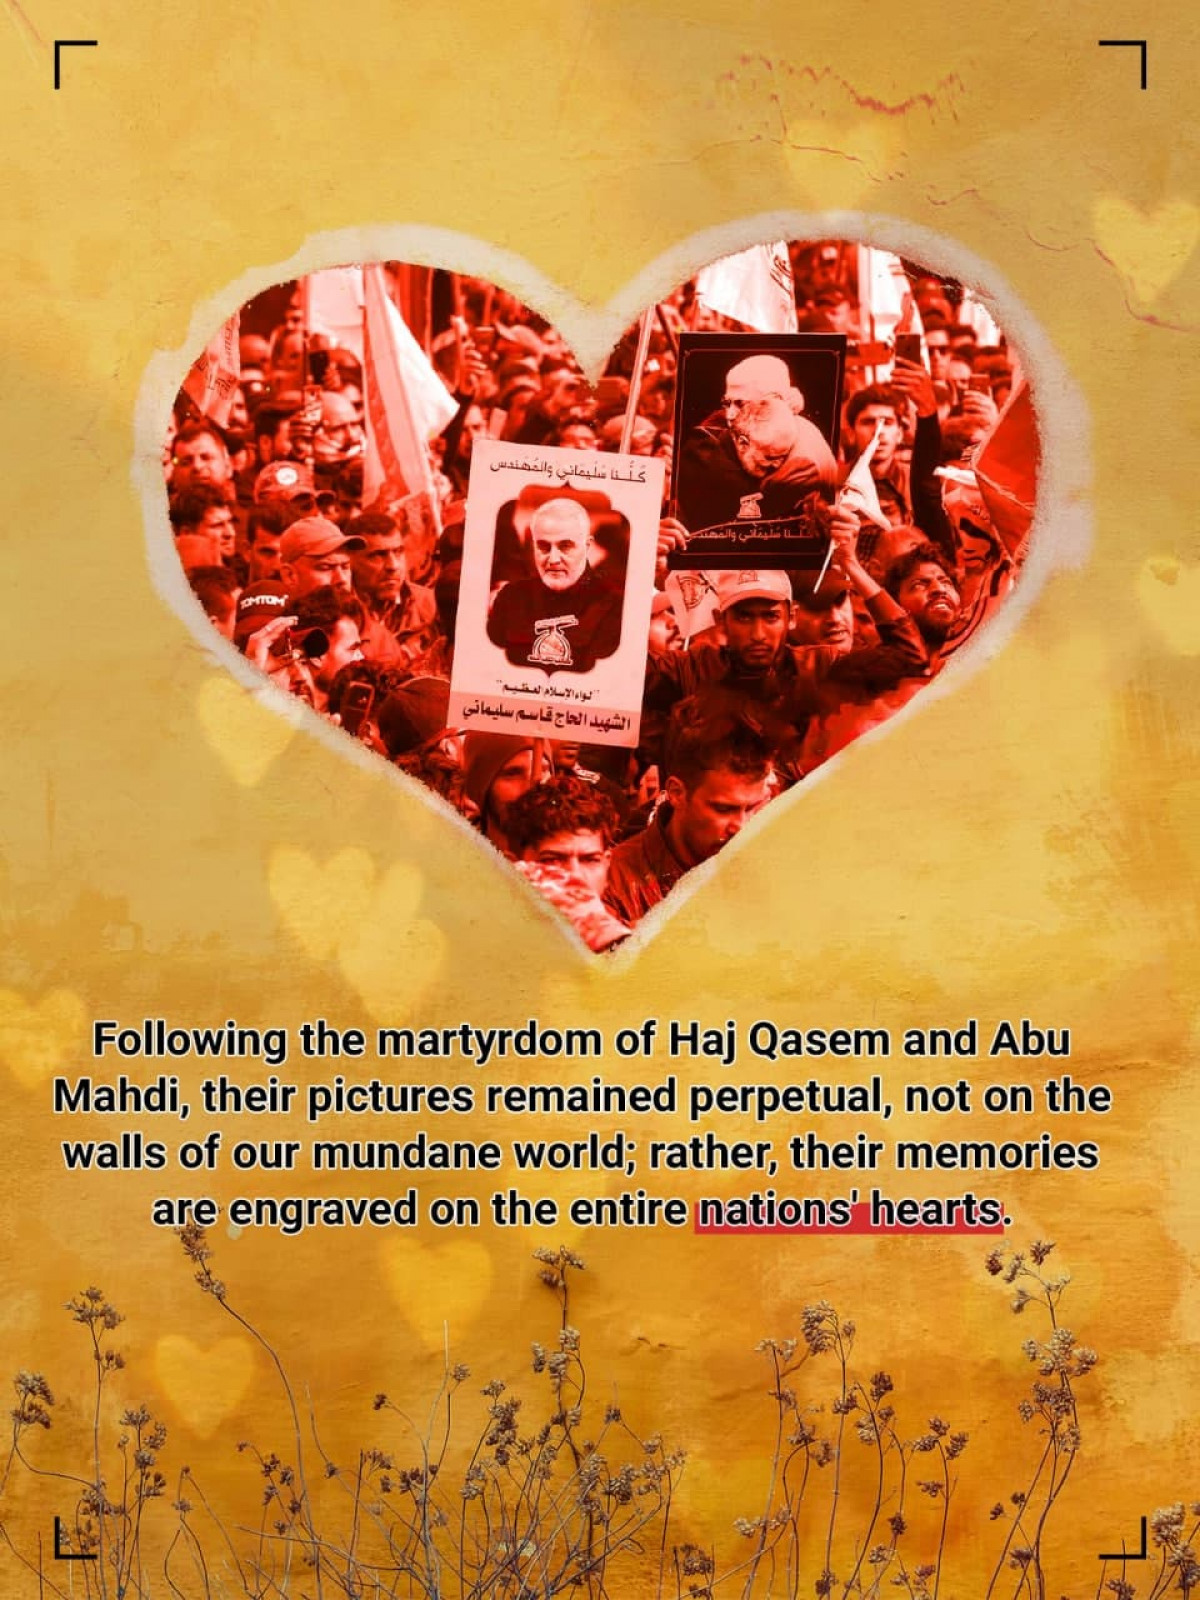 Following the martyrdom of Haj Qasem and Abu Mahdi, their pictures remained perpetual